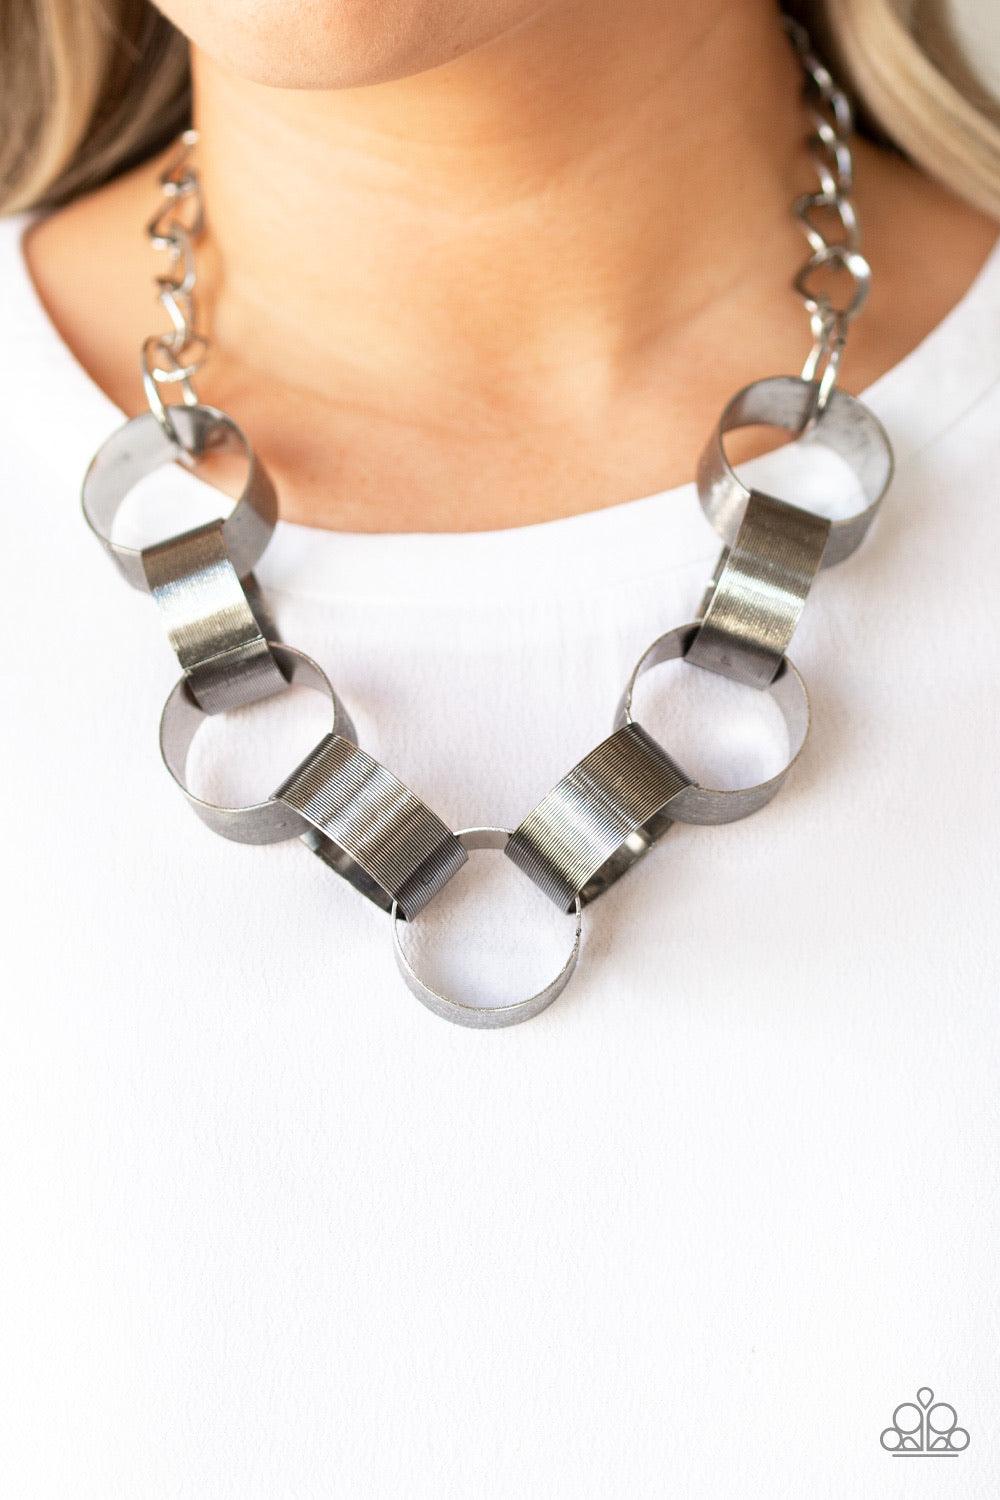 Paparazzi Accessories Big Hit - Silver Etched in linear patterns, dramatically oversized silver links connect below the collar for a bold statement-making look. Features an adjustable clasp closure. Jewelry